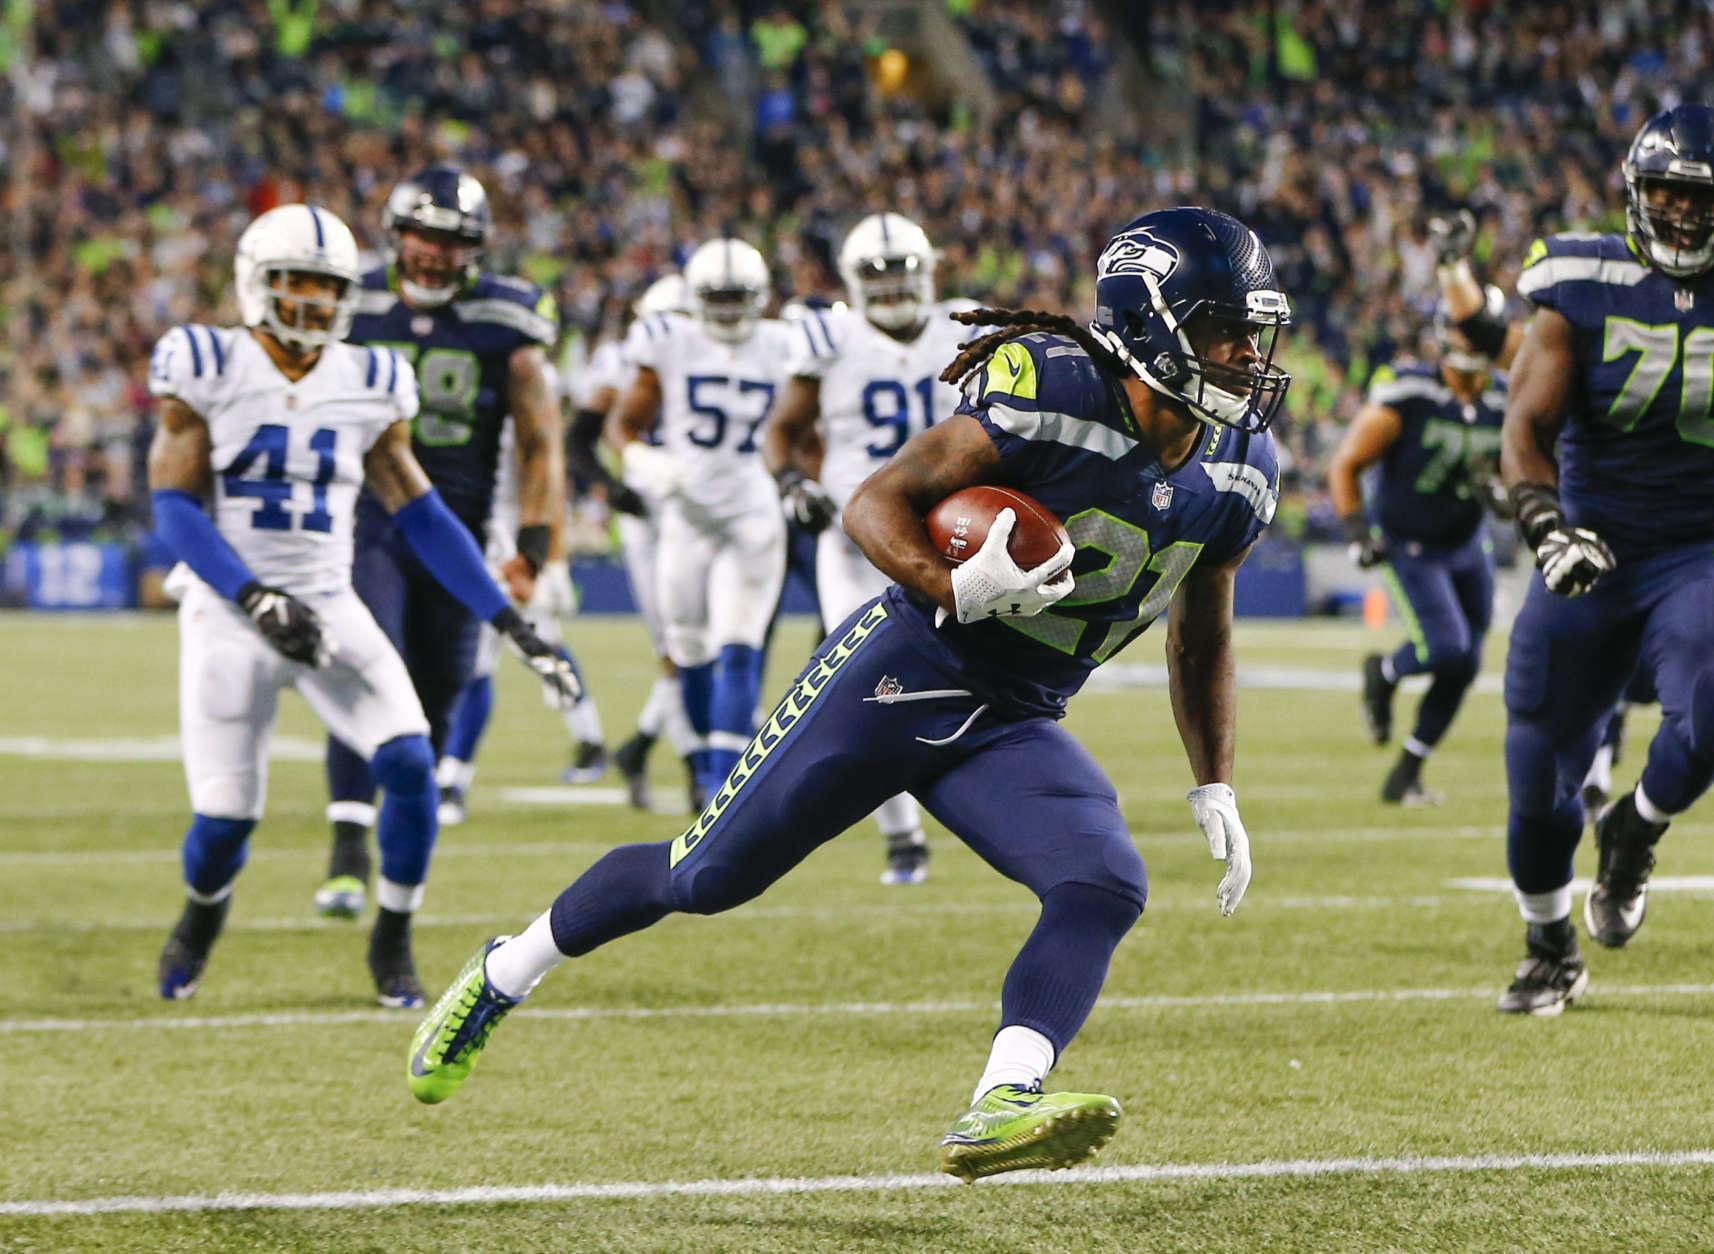 SEATTLE, WA - OCTOBER 01: Running back J.D. McKissic #21 of the Seattle Seahawks scores a touchdown against the Indianapolis Colts in the third quarter of the game at CenturyLink Field on October 1, 2017 in Seattle, Washington. (Photo by Jonathan Ferrey/Getty Images)